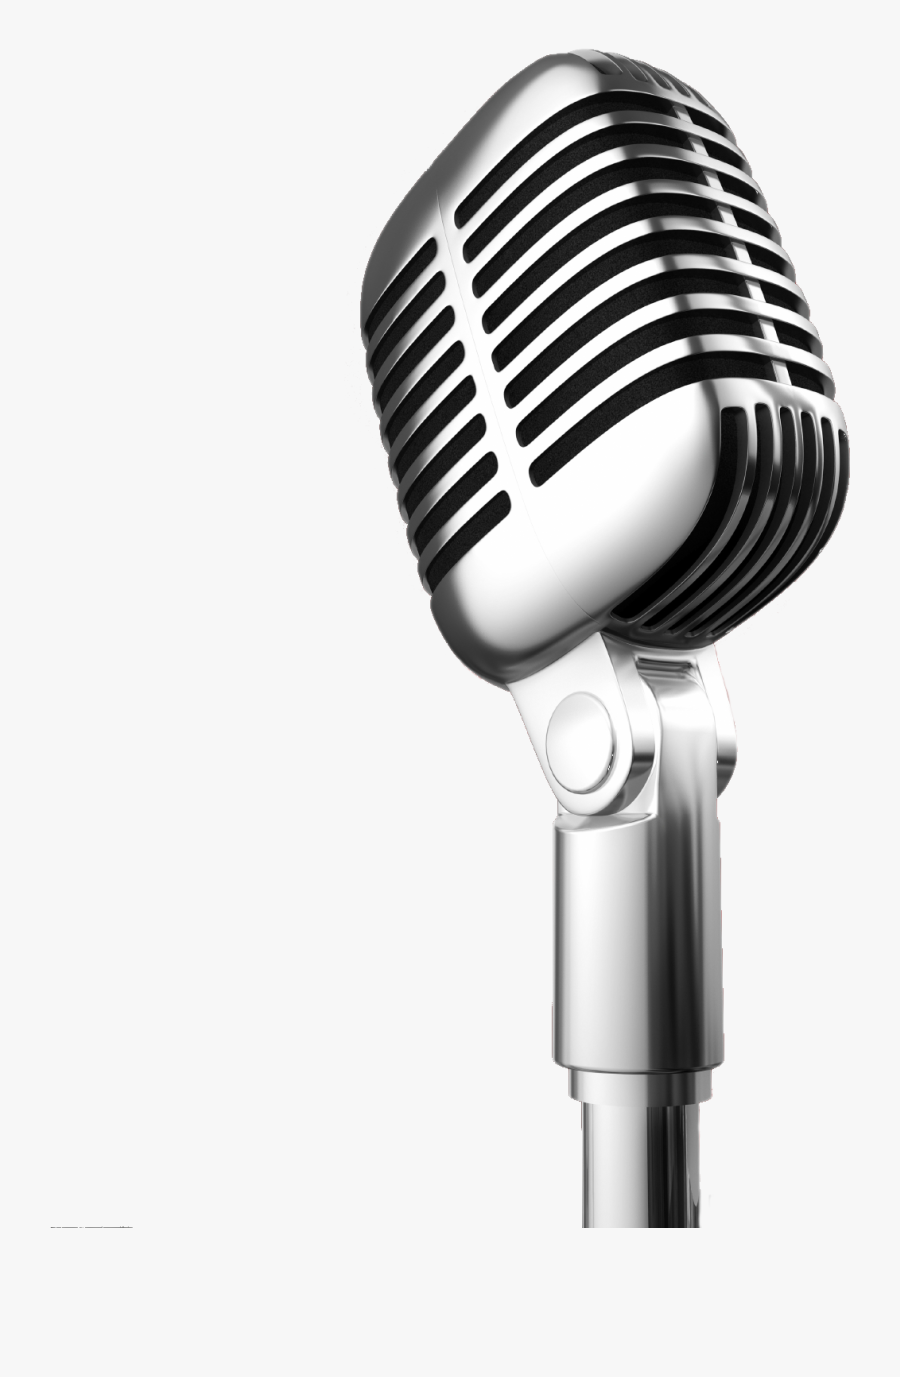 Microphone News Book Human Voice Recording Studio - Microphone Transparent, Transparent Clipart